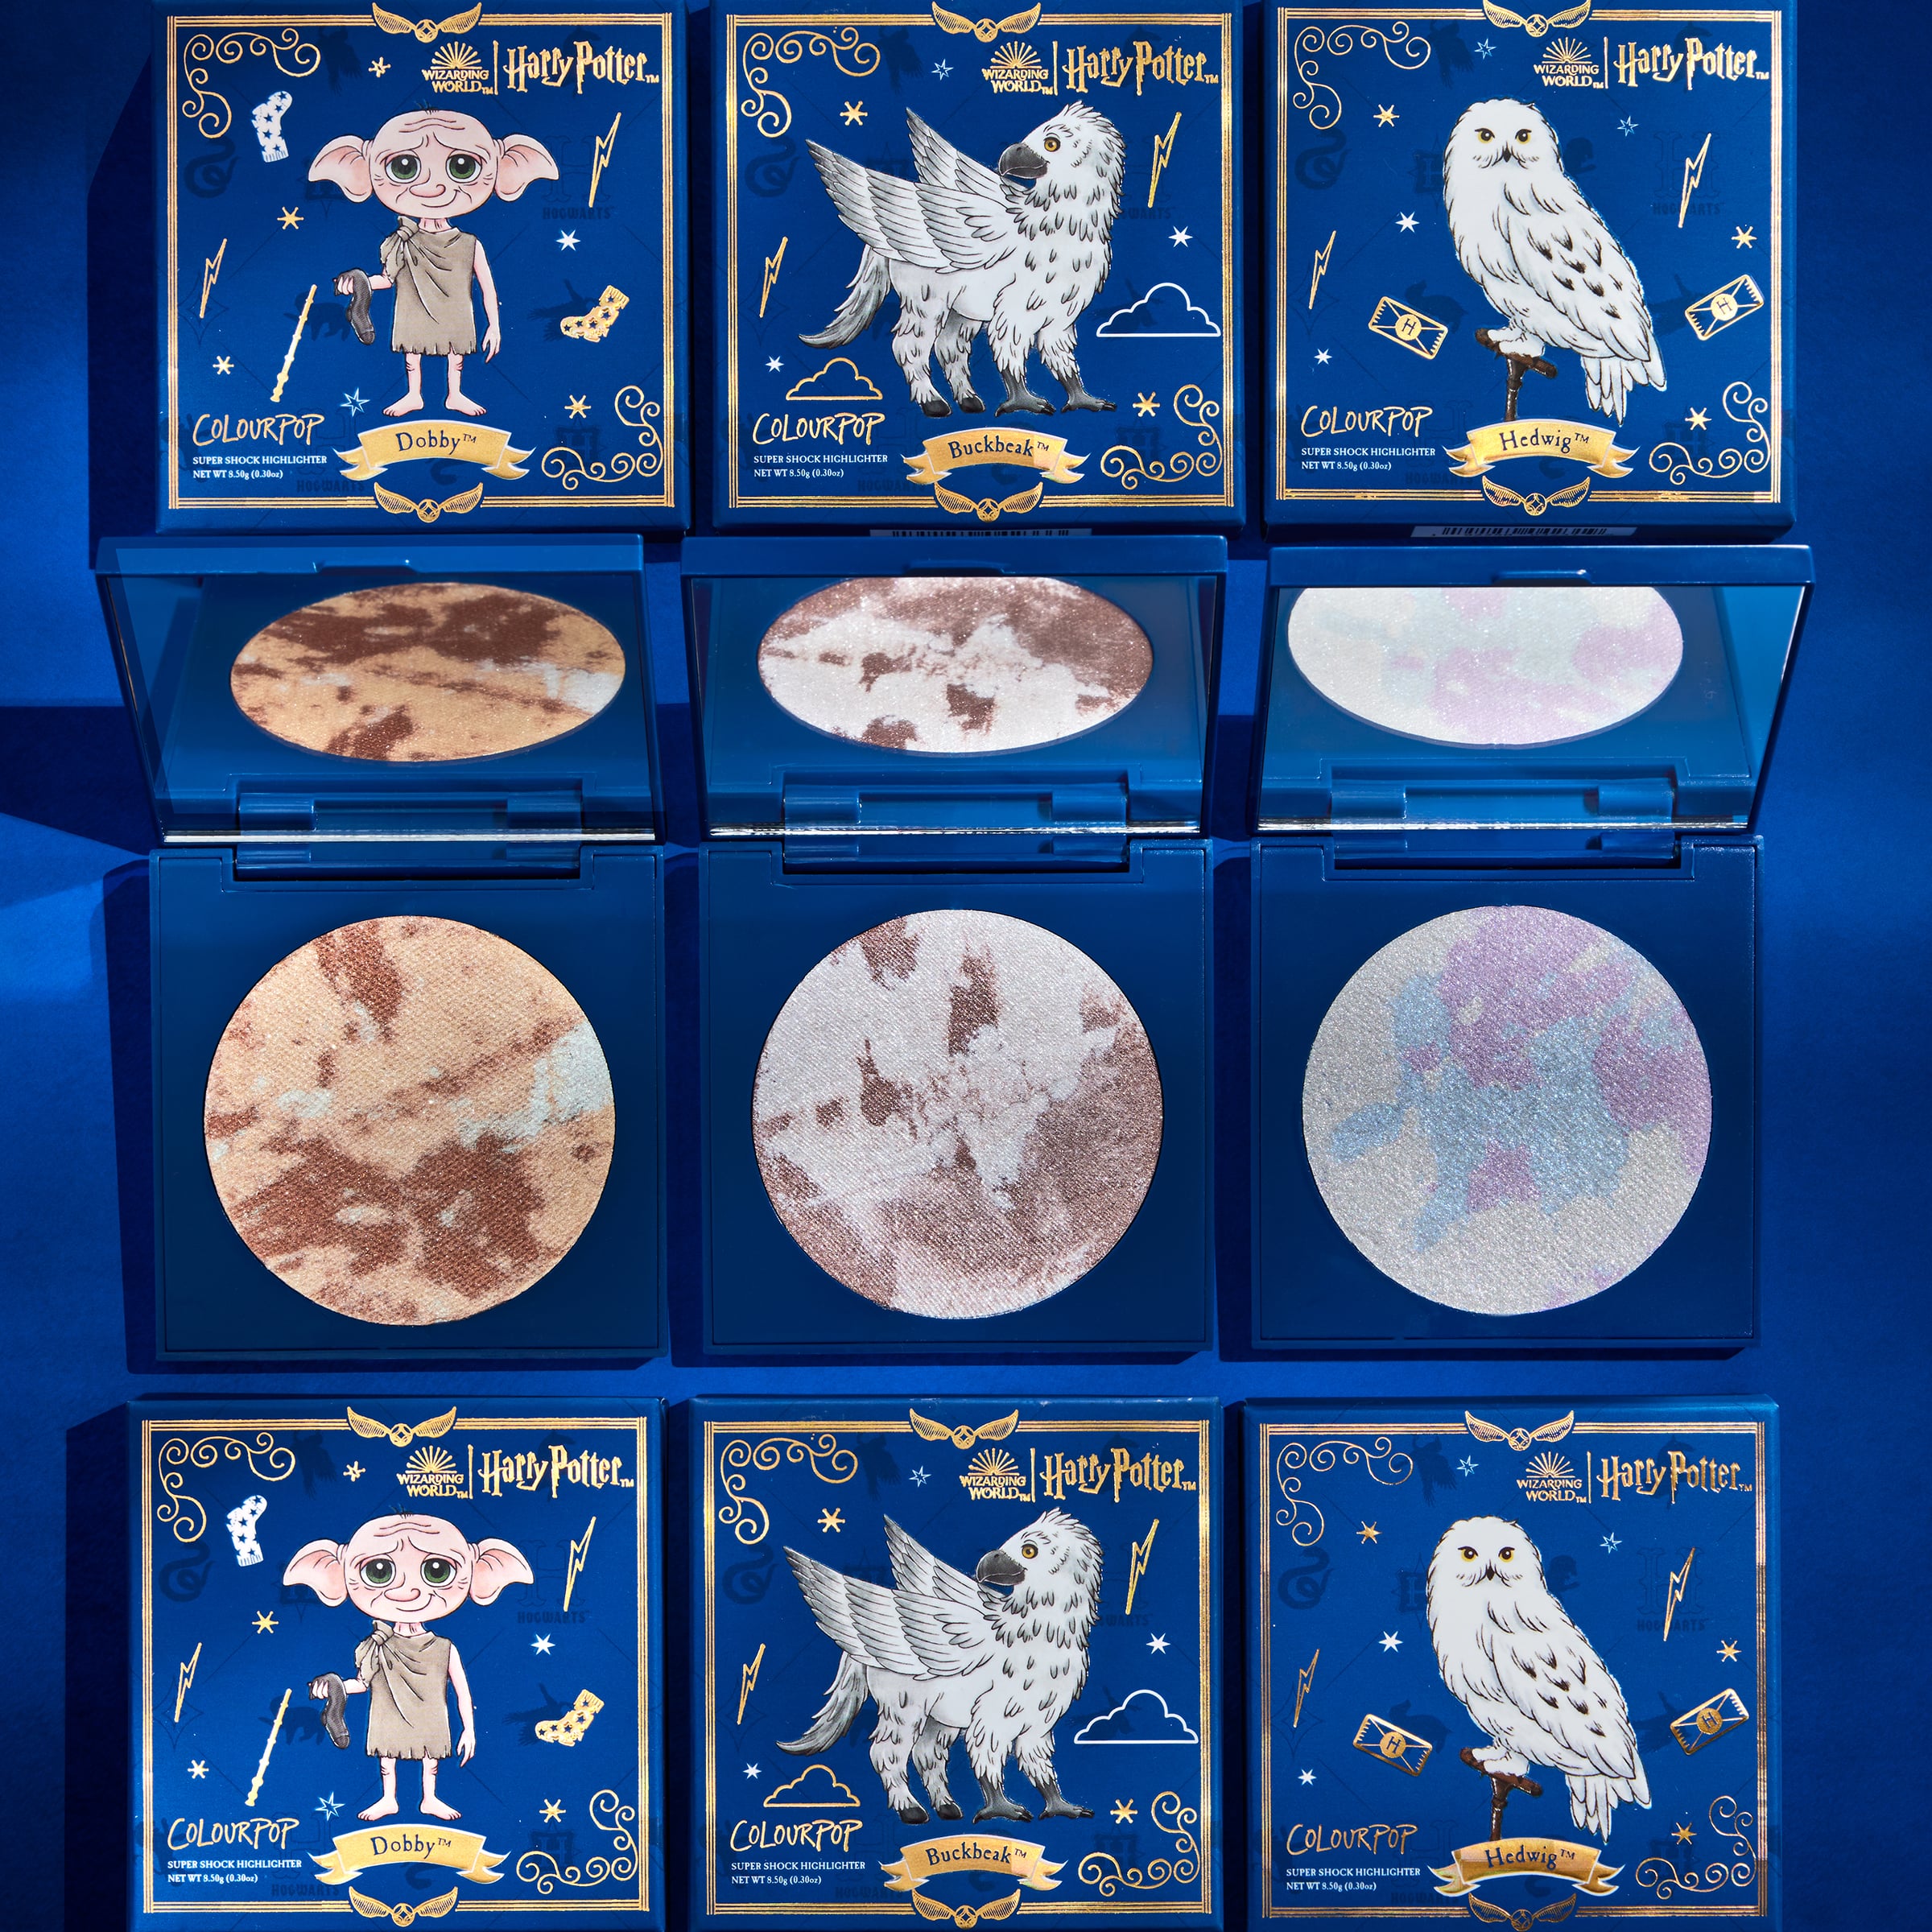 This Holographic Harry Potter–Inspired Makeup Collection Is Truly Magical